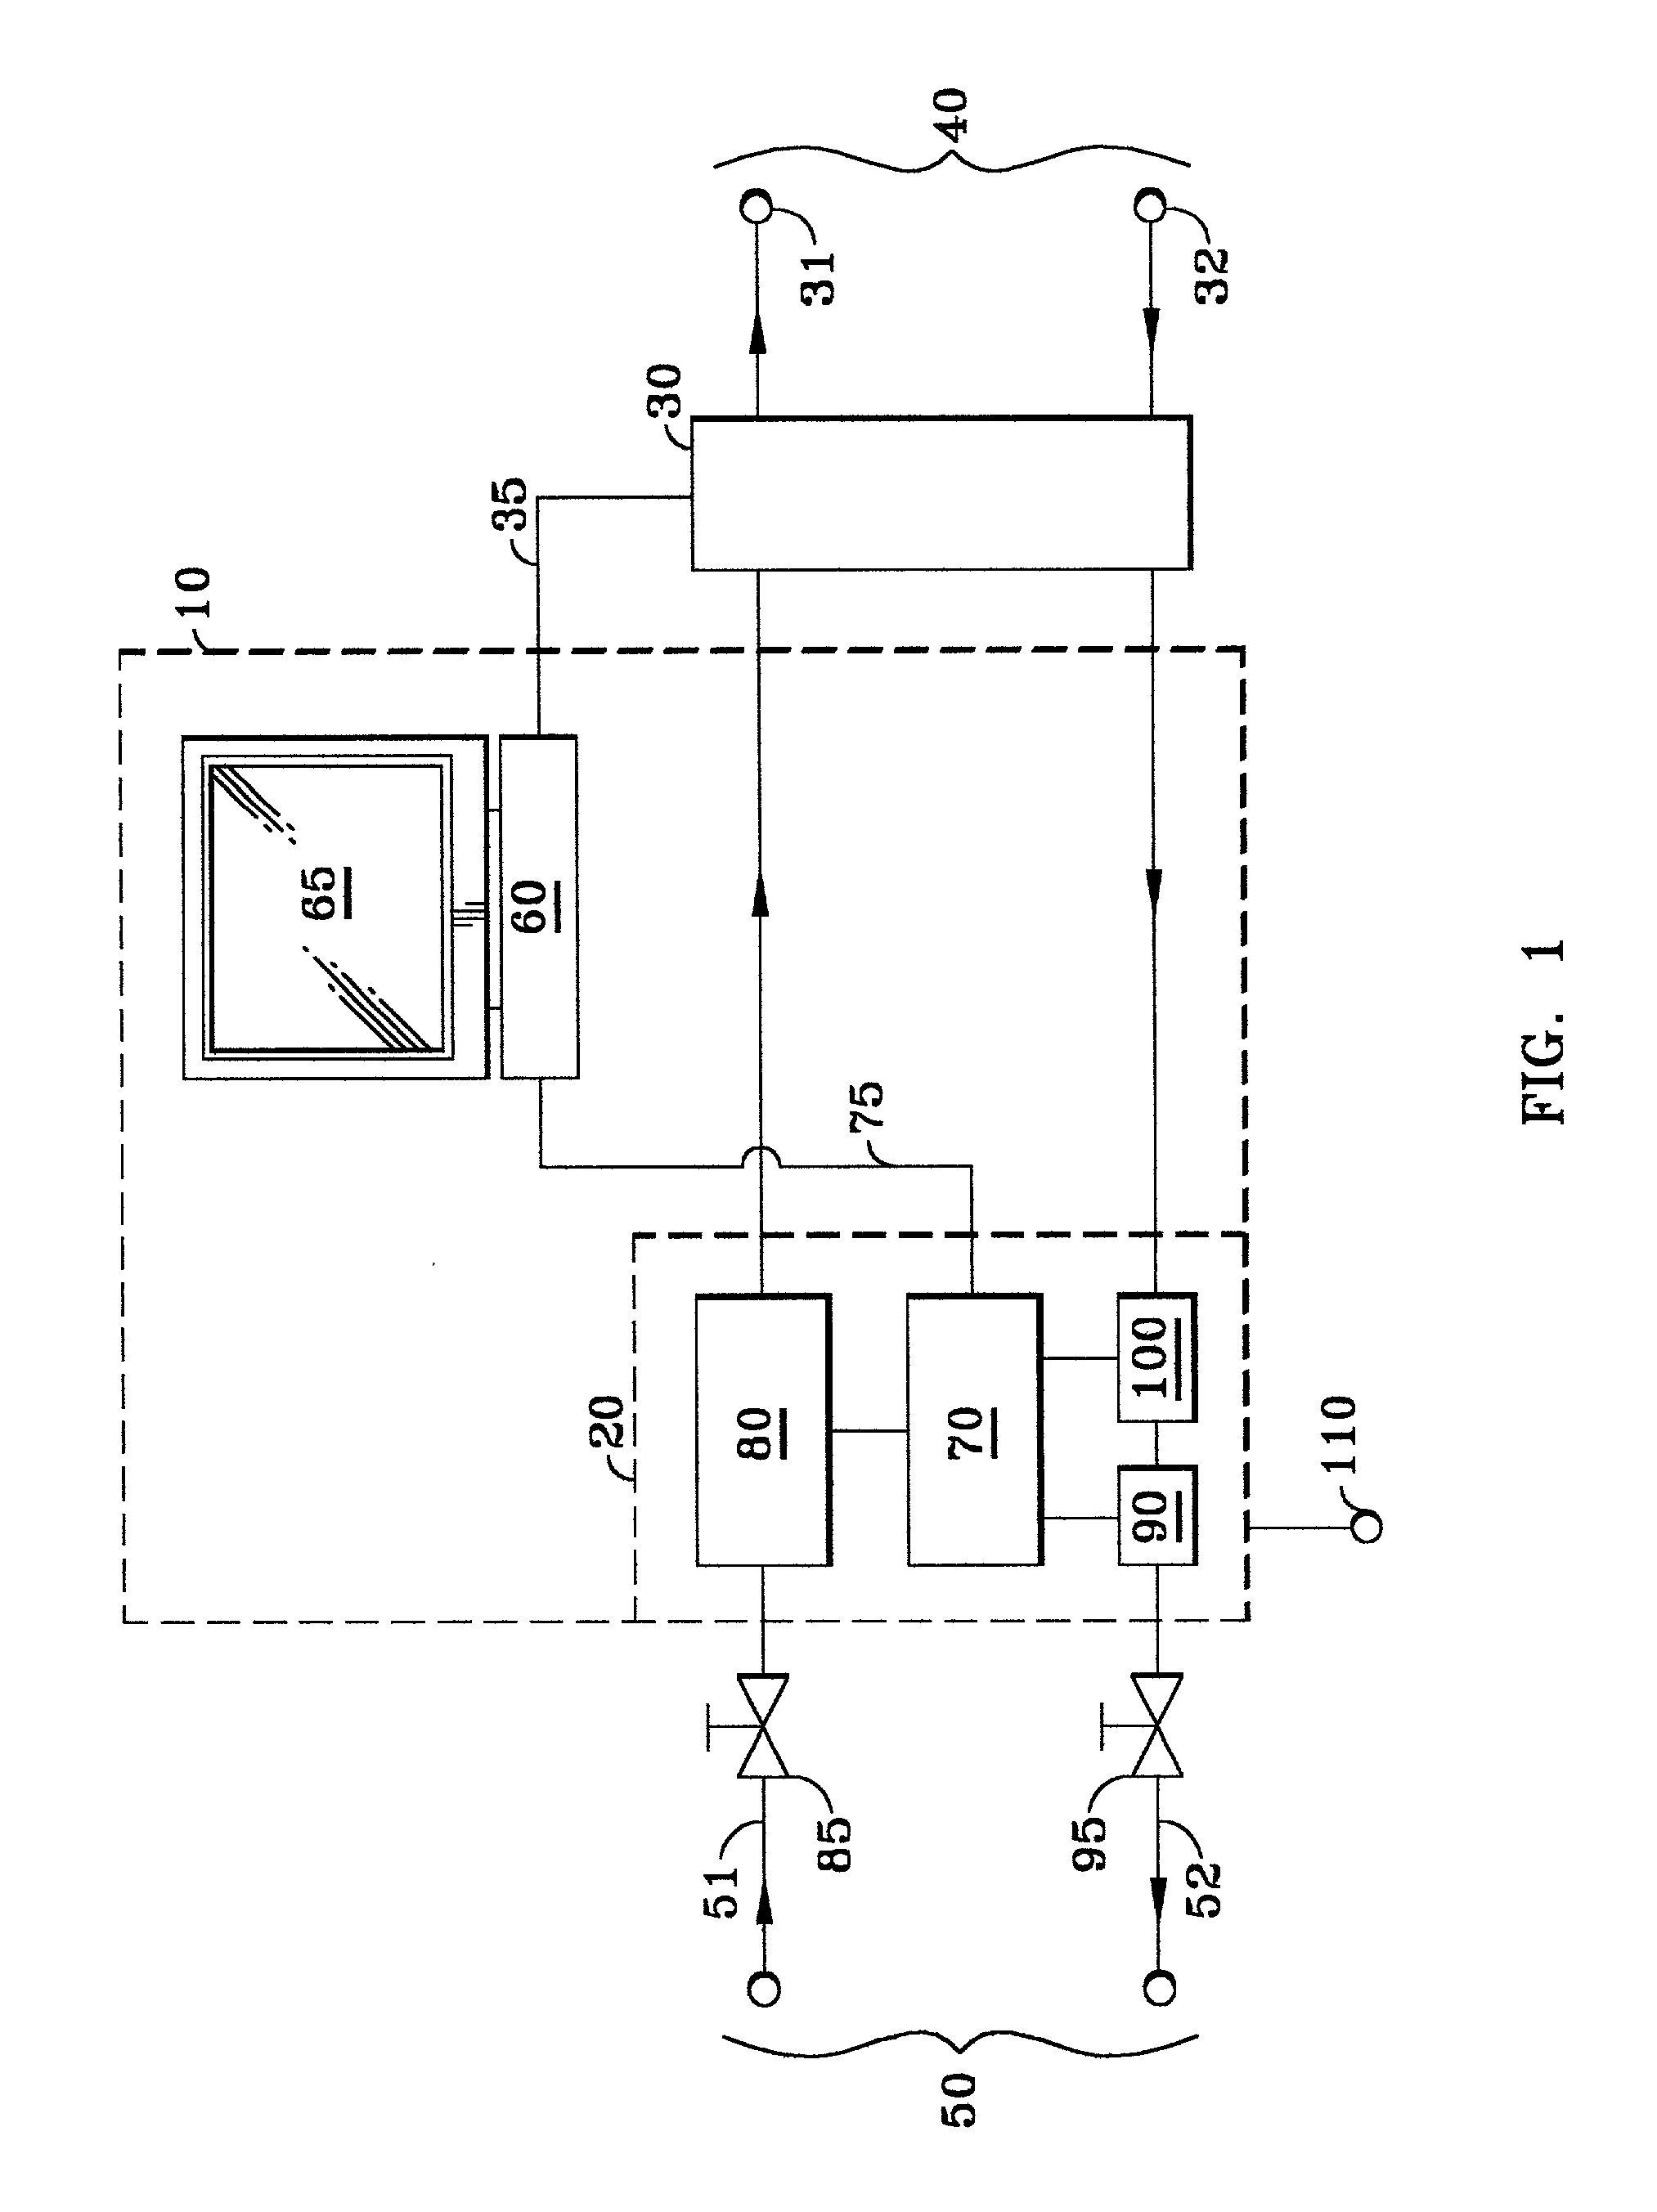 Apparatus and methods for monitoring and testing coolant recirculation systems